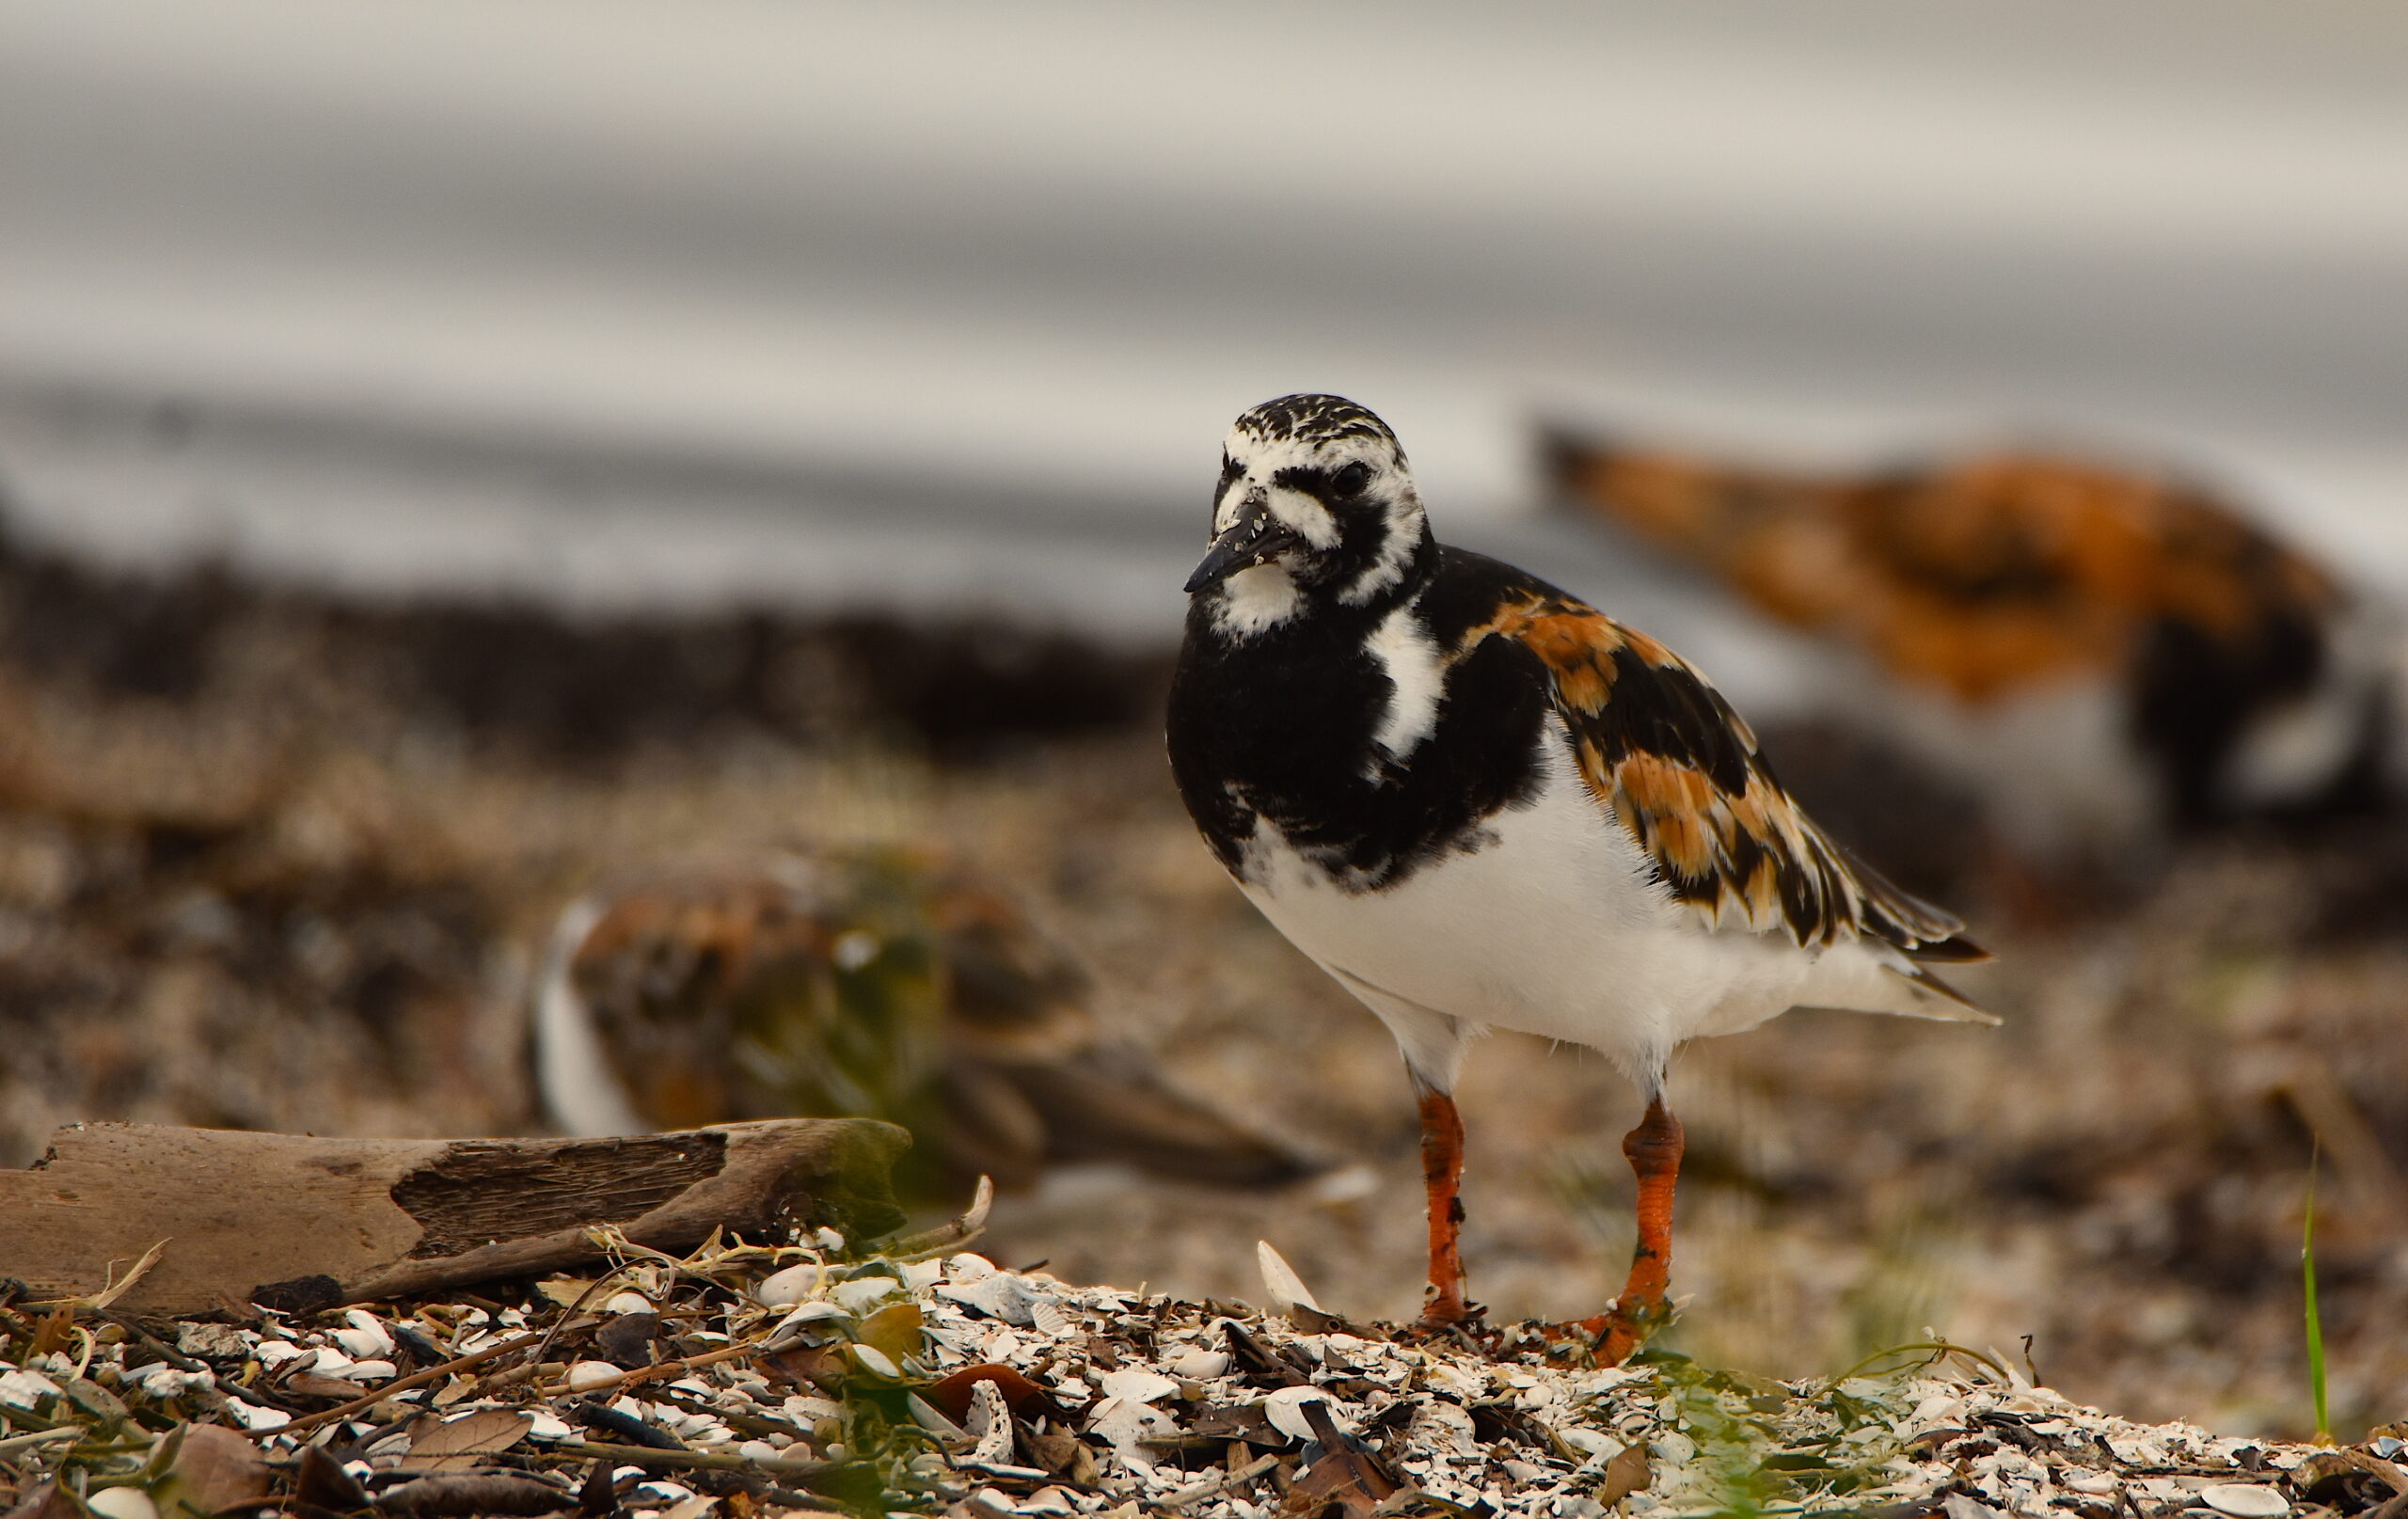 image: A ruddy turnstone on the shore of the Mosquito Lagoon, Florida. Credit: Kate Perez/CC-BY-SA 4.0.